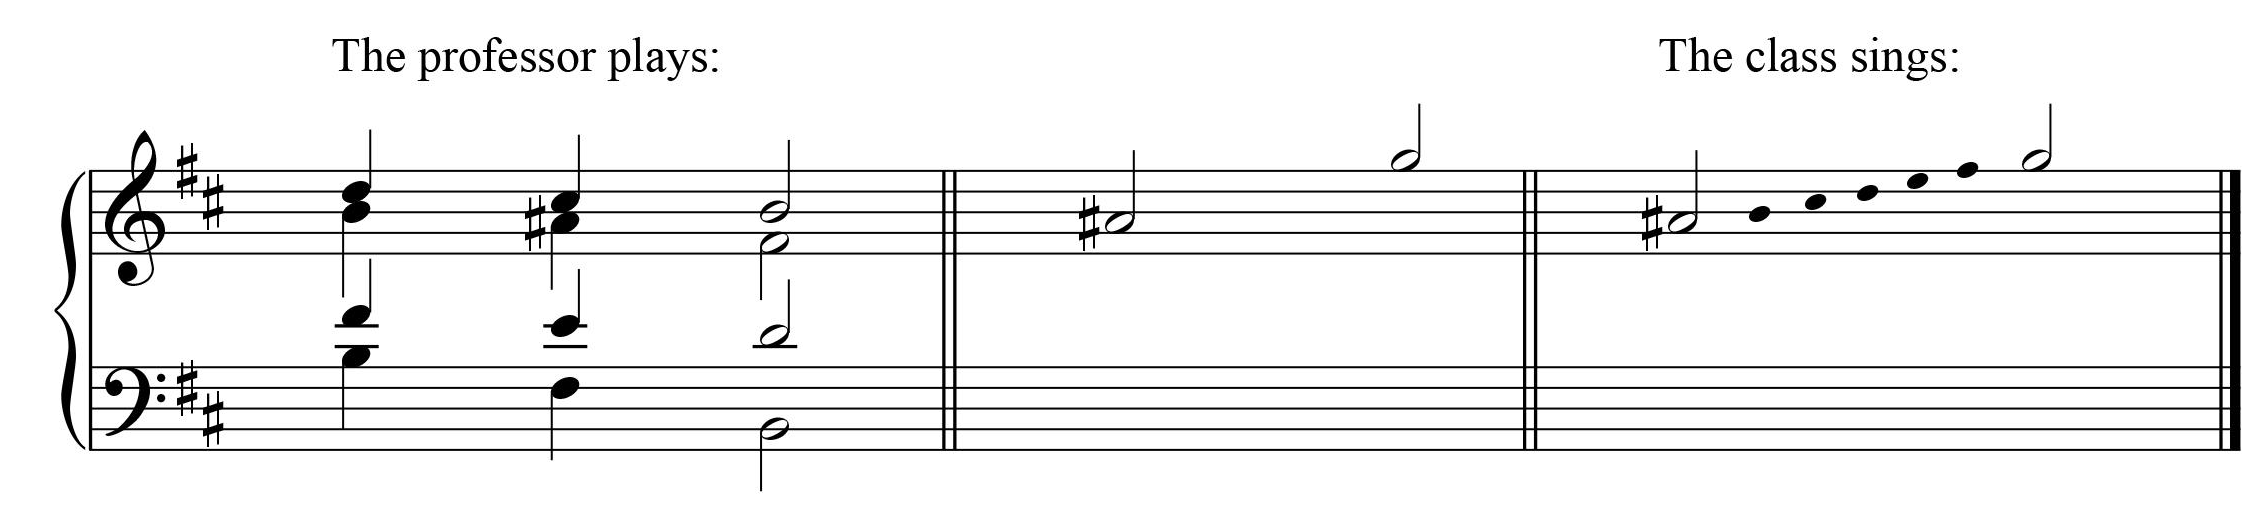 A directed 'sung analysis' of the intervals in Figure 1. Now a diminished 7th.